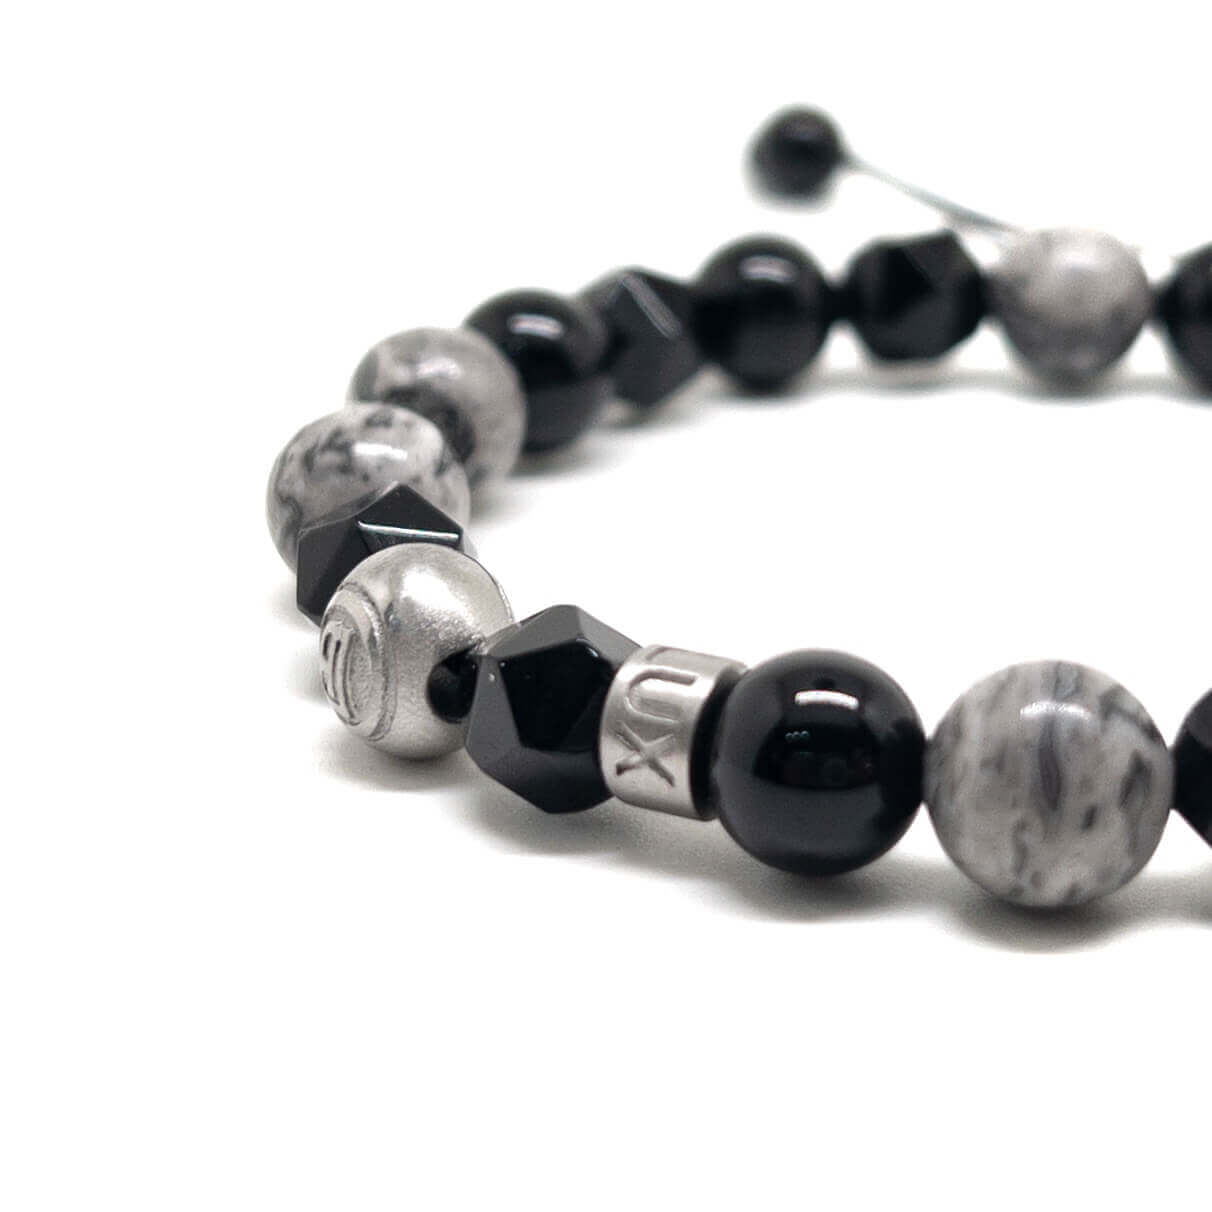 The Grey and Obsidian Signed Thread Bracelet